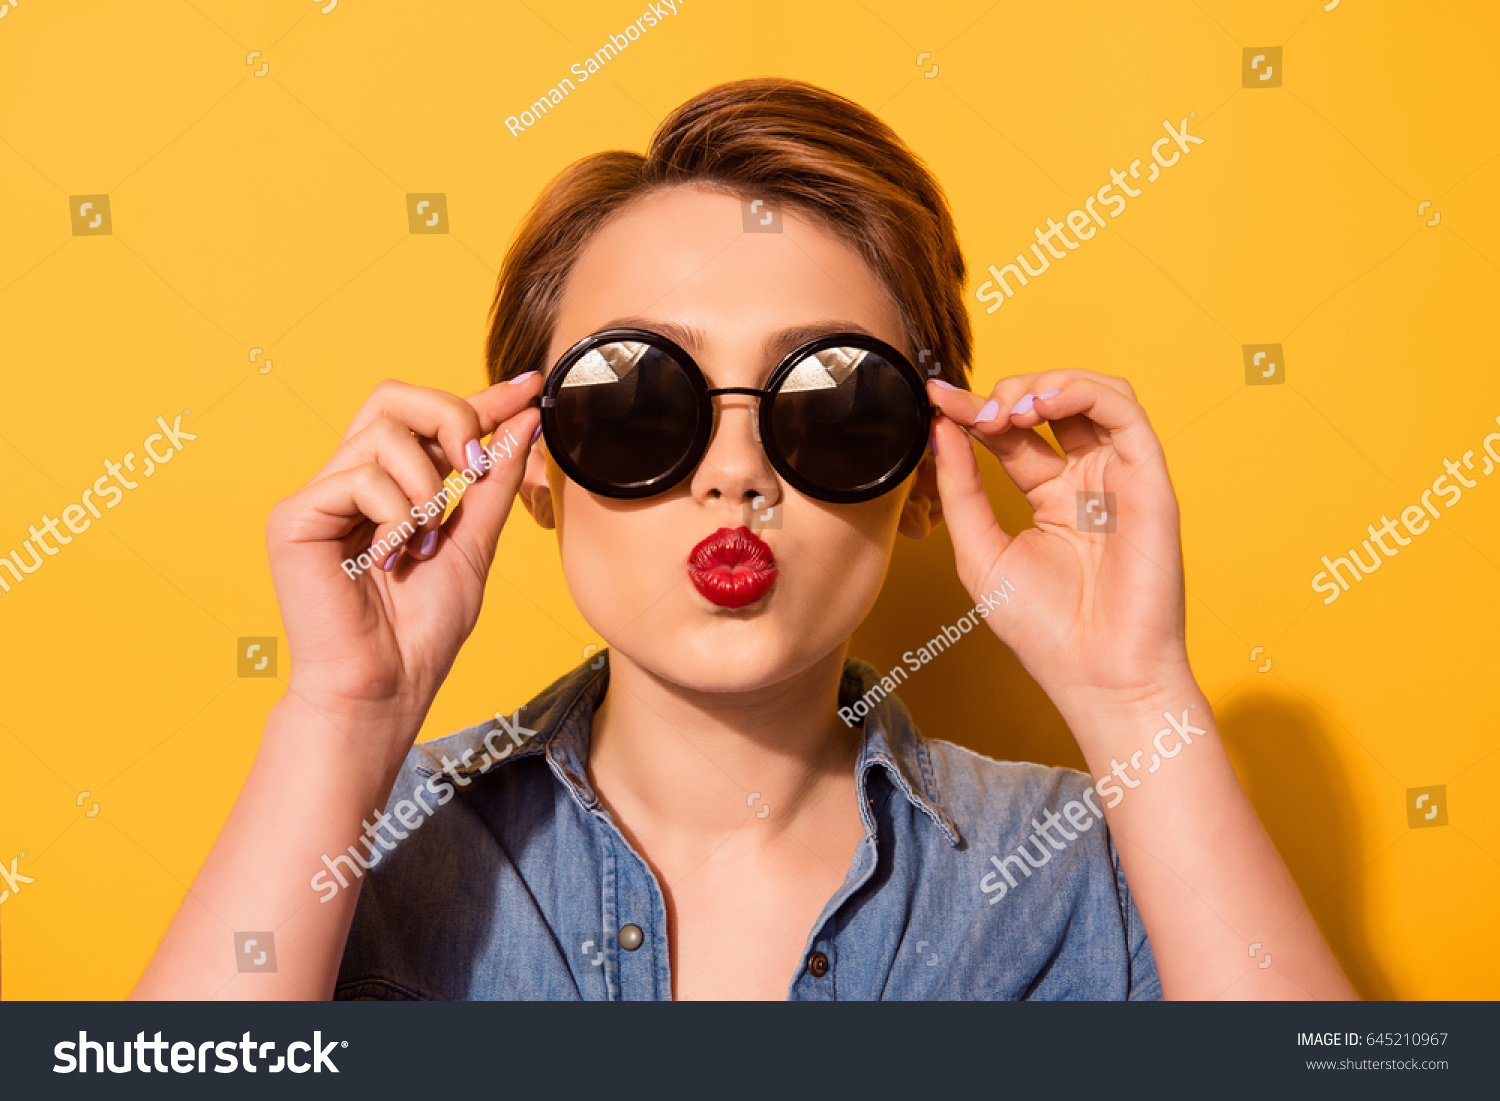 Kiss for you! Fashionable young cute girl in trendy sunglasses sends a kiss against bright yellow background, she holds spectacles with her hands #645210967